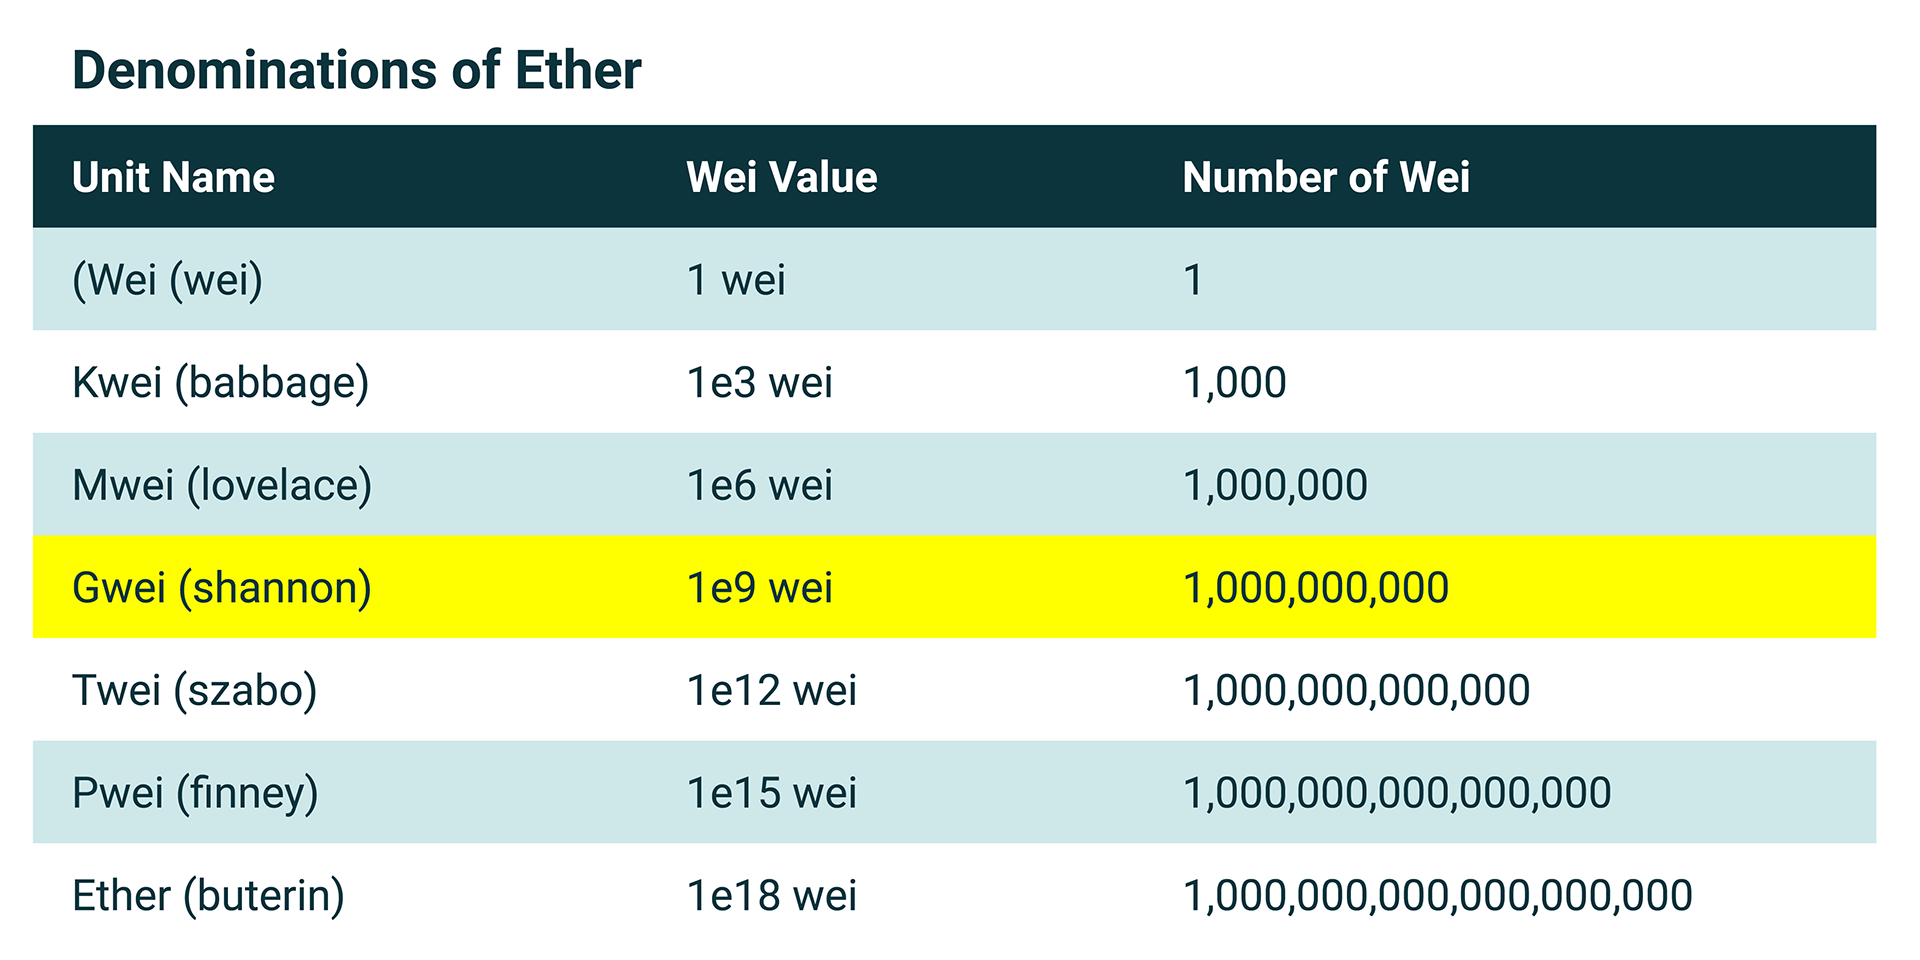 Denominations of Ether